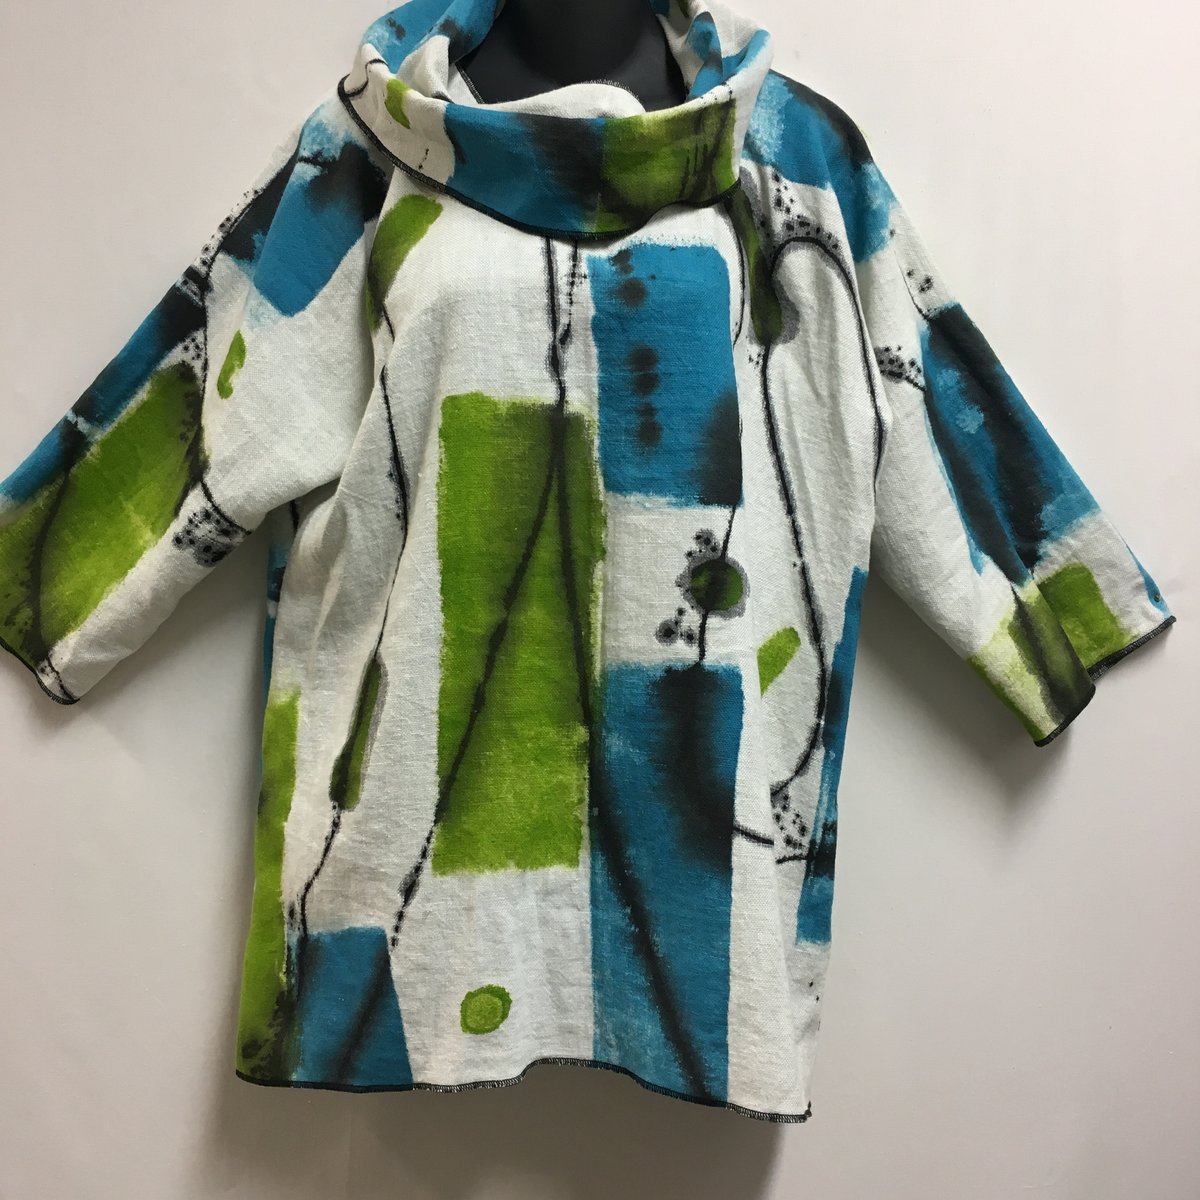 Image of Alison Tunic - cotton/rayon - hand painted "inner Joy and Strength" design